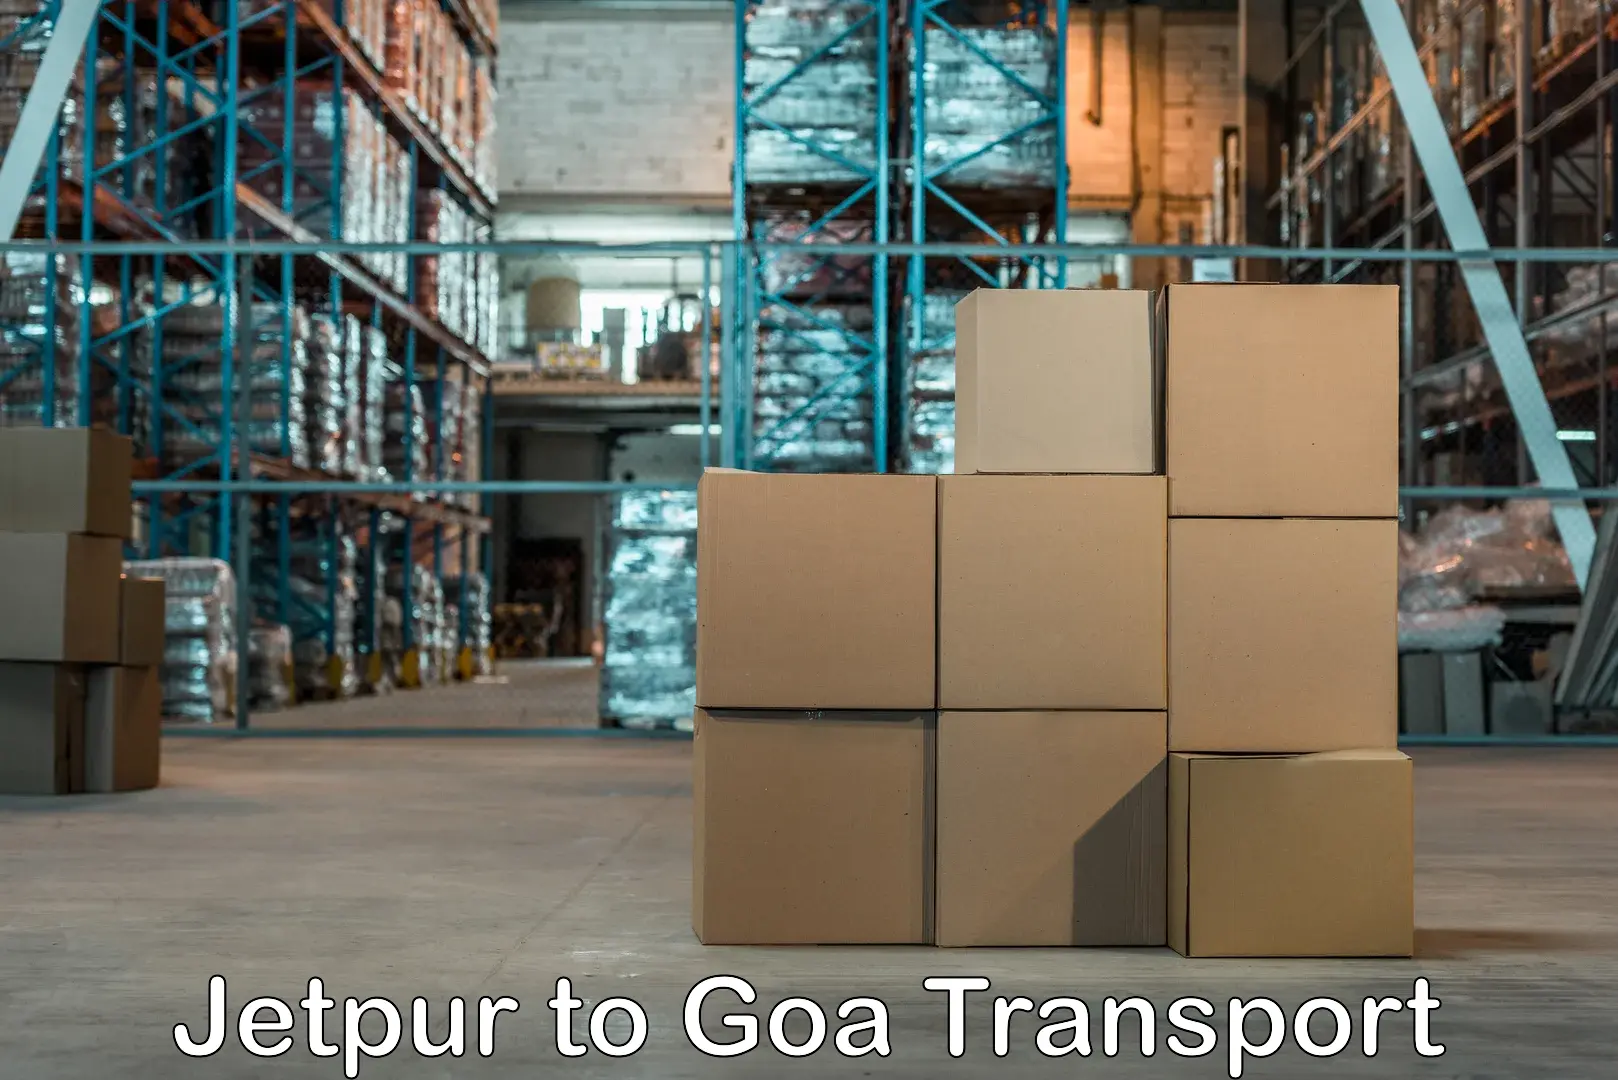 Online transport booking Jetpur to Goa